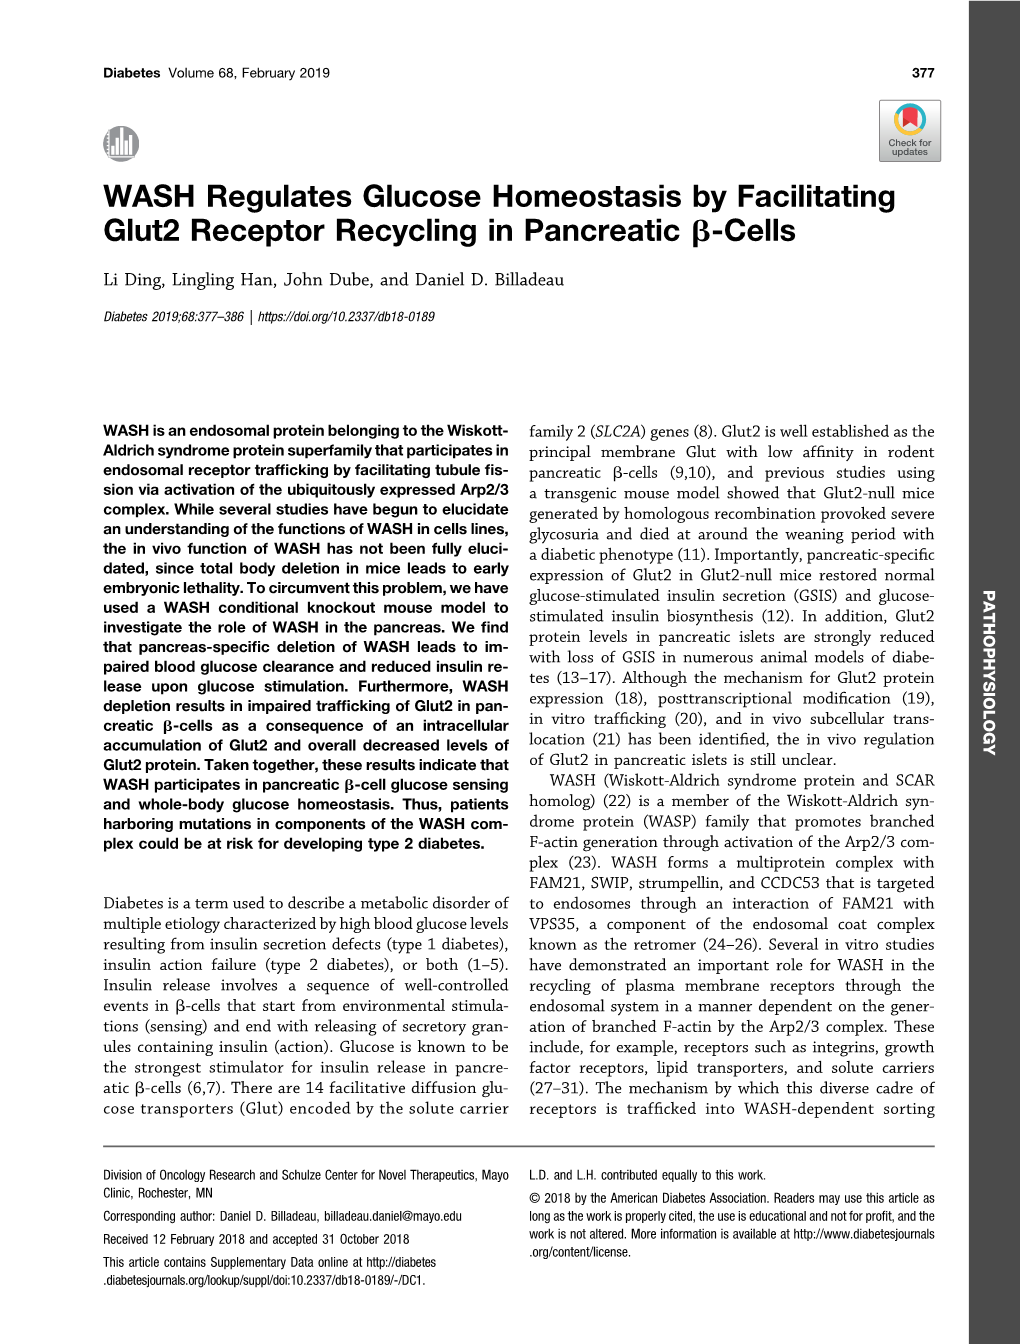 WASH Regulates Glucose Homeostasis by Facilitating Glut2 Receptor Recycling in Pancreatic B-Cells